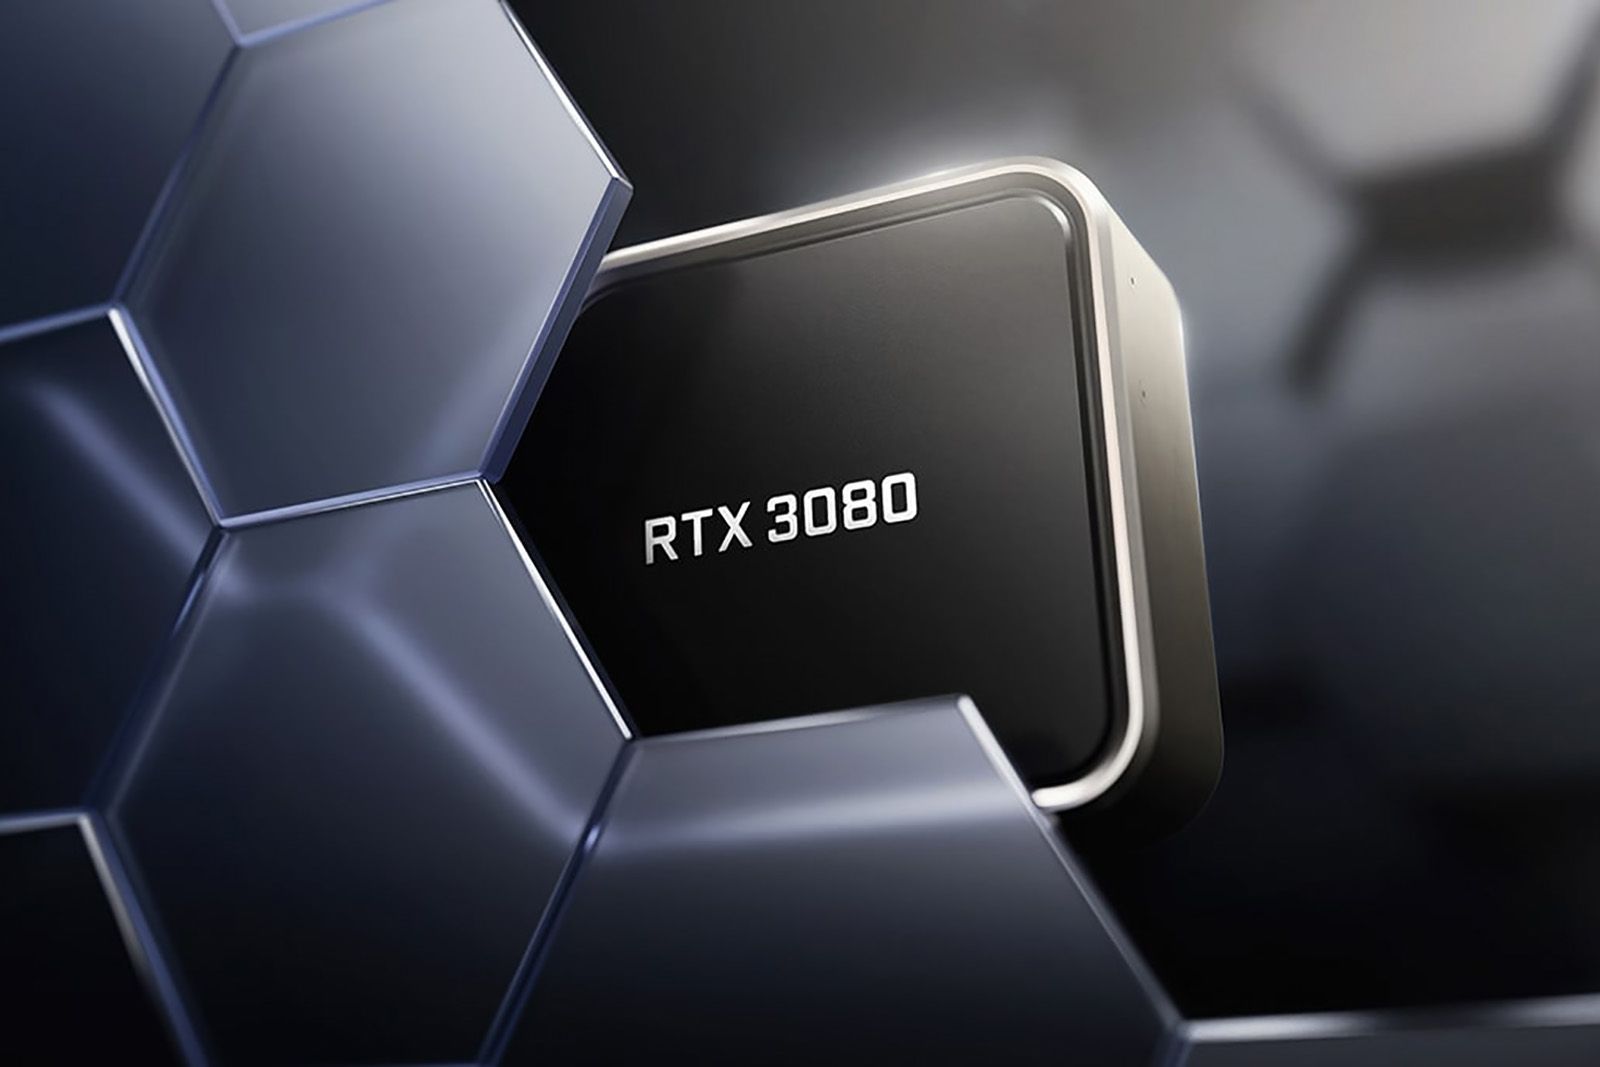 Nvidia GeForce Now cloud service adds RTX 3080 gaming with a new tier photo 1